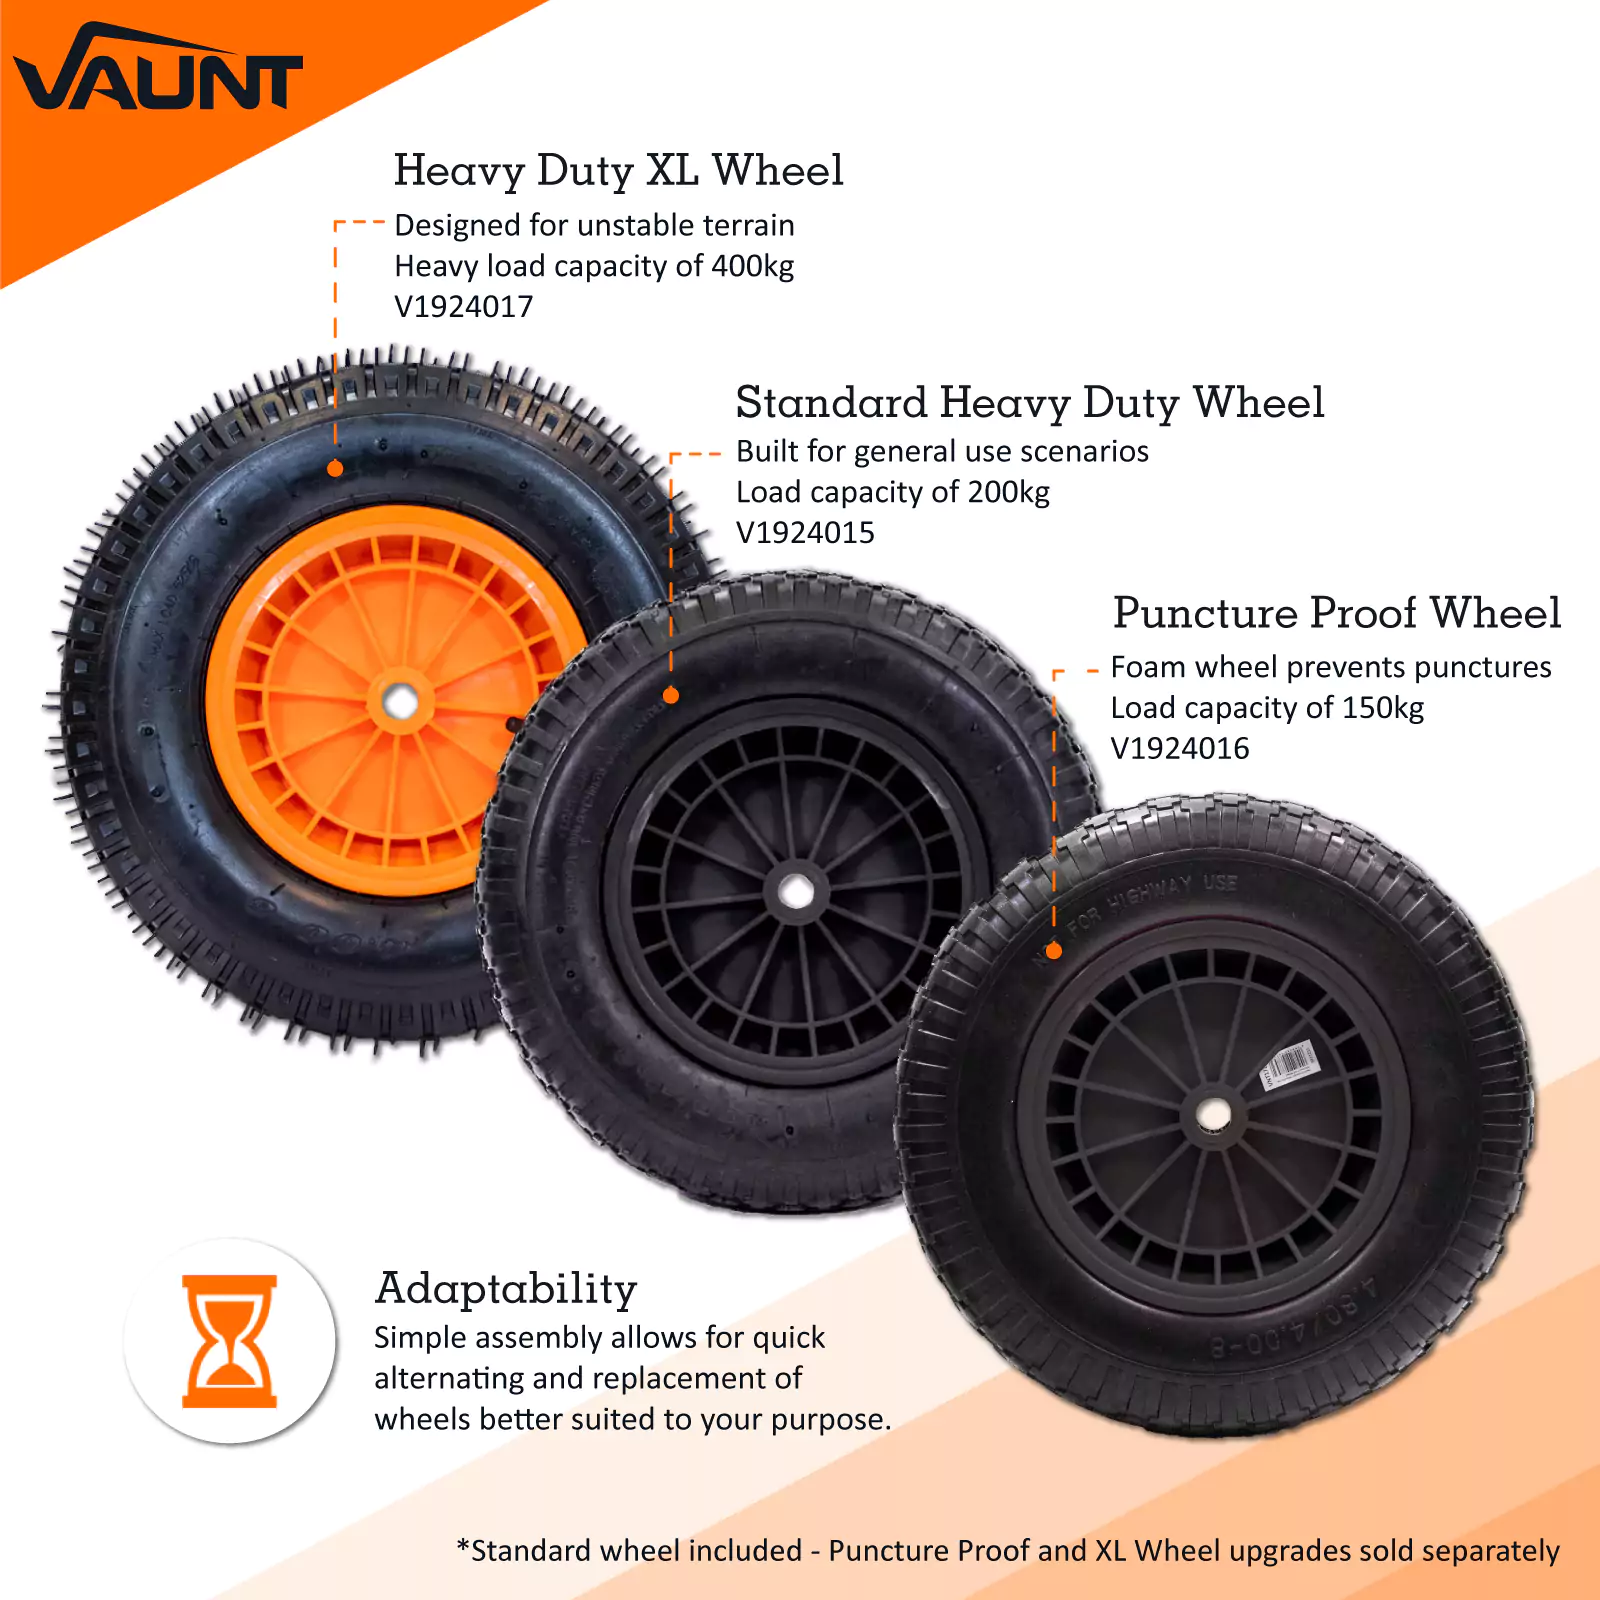 an infographic explaining the difference between vaunts 3 wheels 
heavy xl duty , standard heavy duty
and puncture proof wheels 